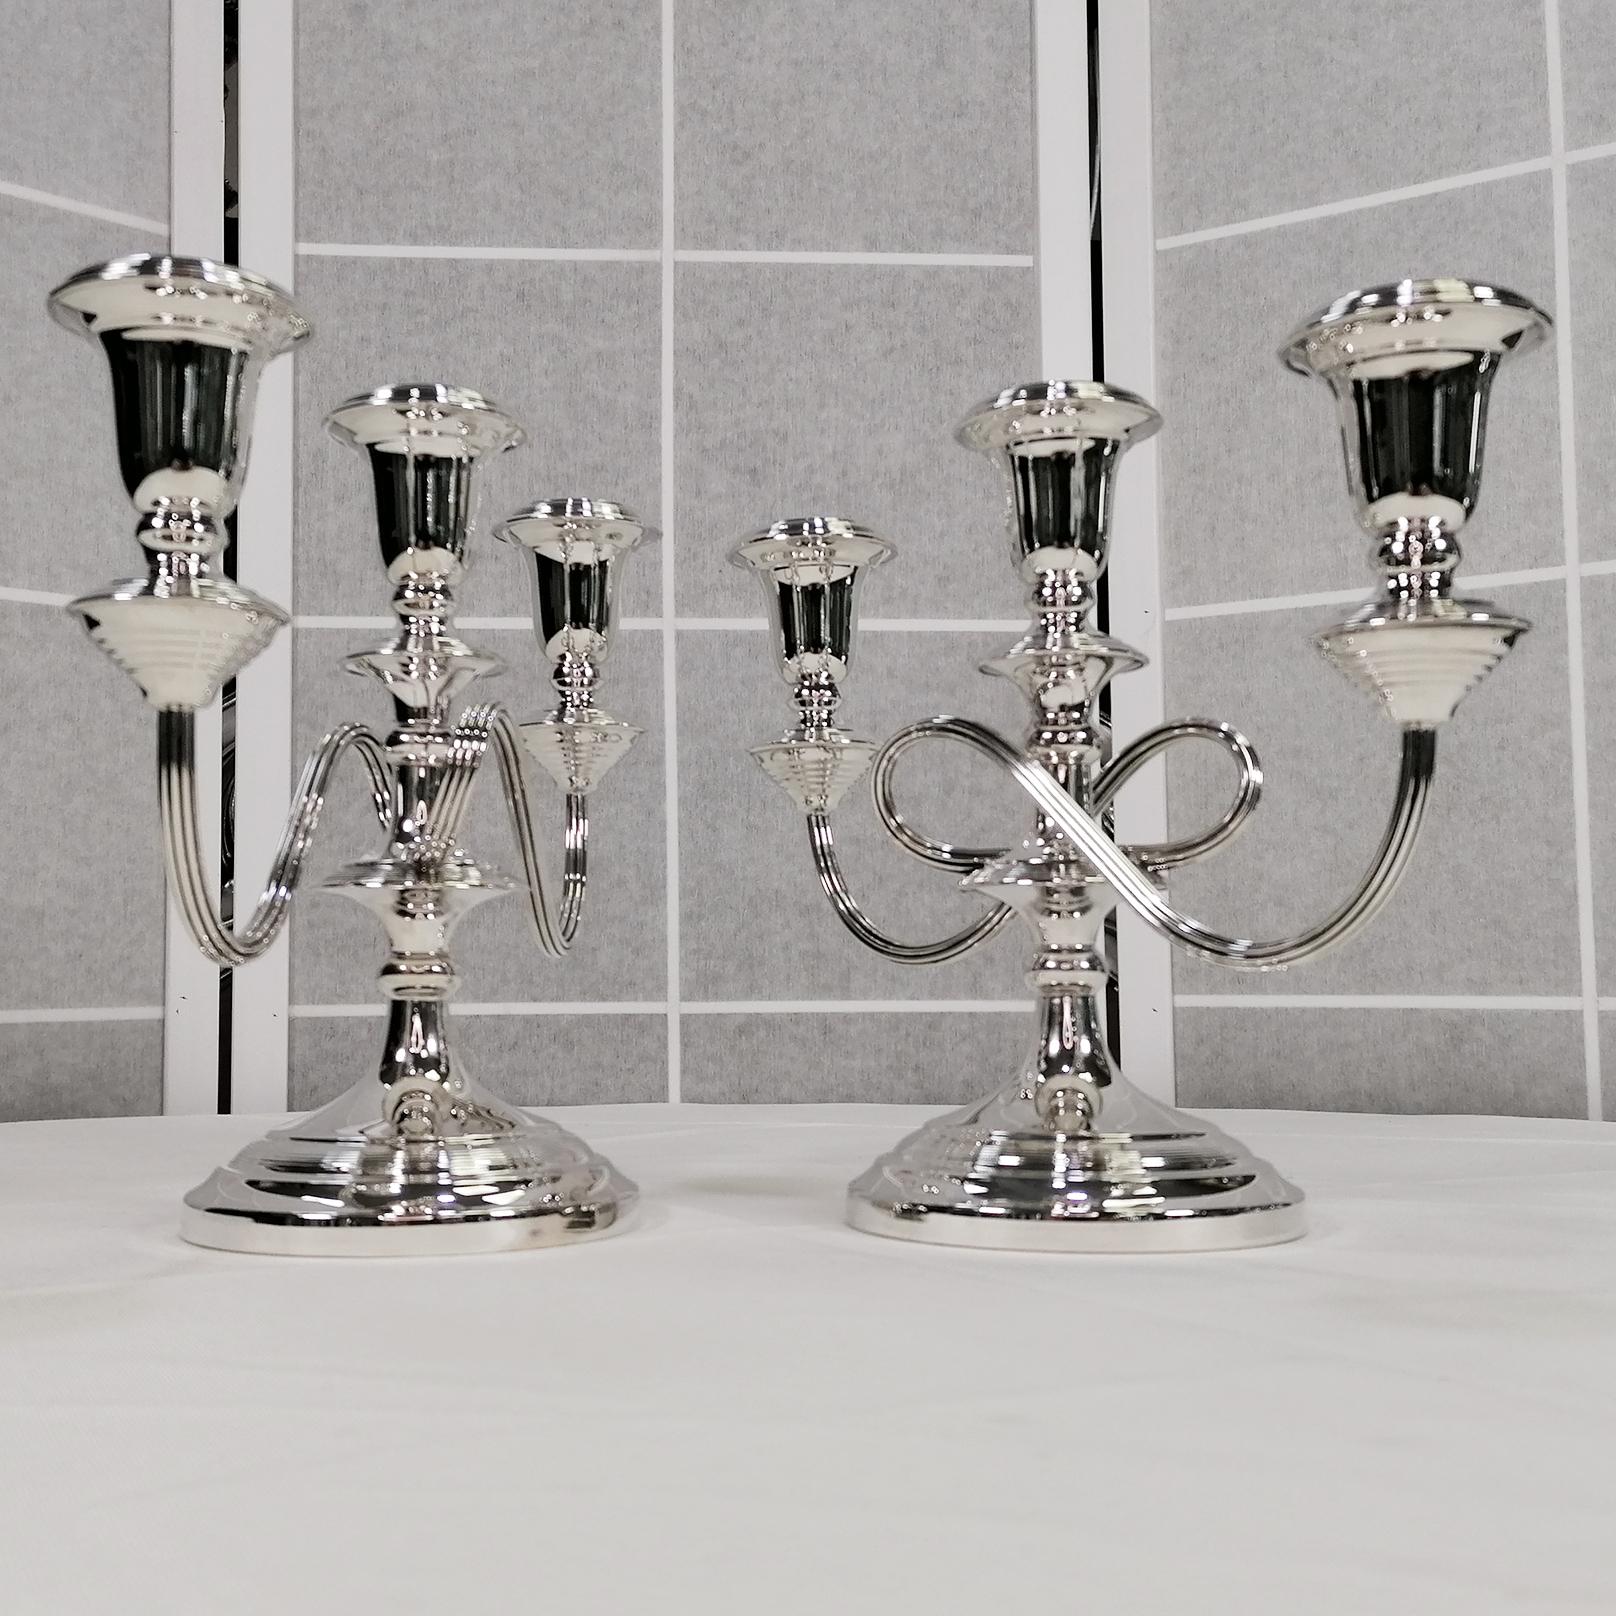 20th Century Italian solid Silver Pr. of Candelabras For Sale 9